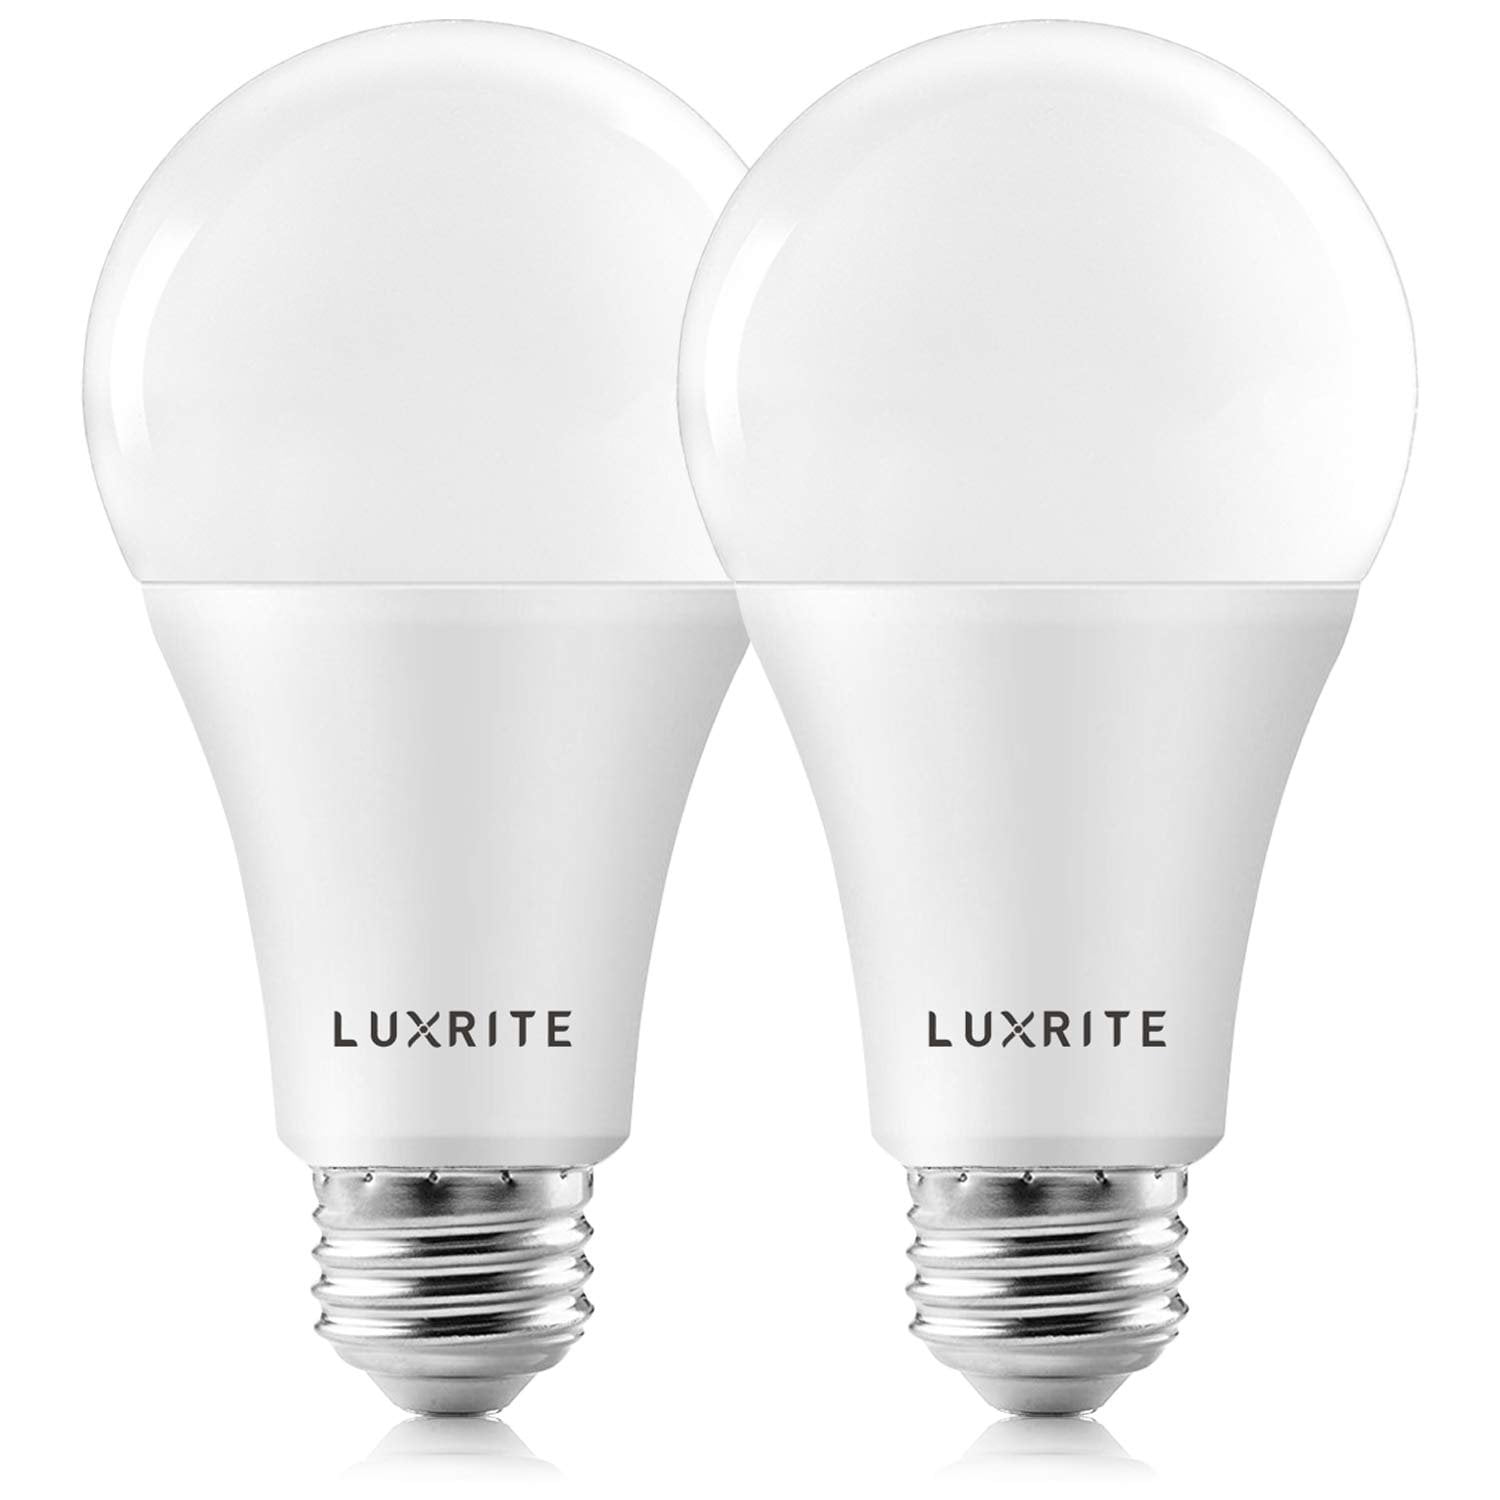 Luxrite A21 Dimmable LED Light Bulbs 22W (150W Equivalent) 3000K Warm  White, 2550 Lumens, E26, 2 Pack